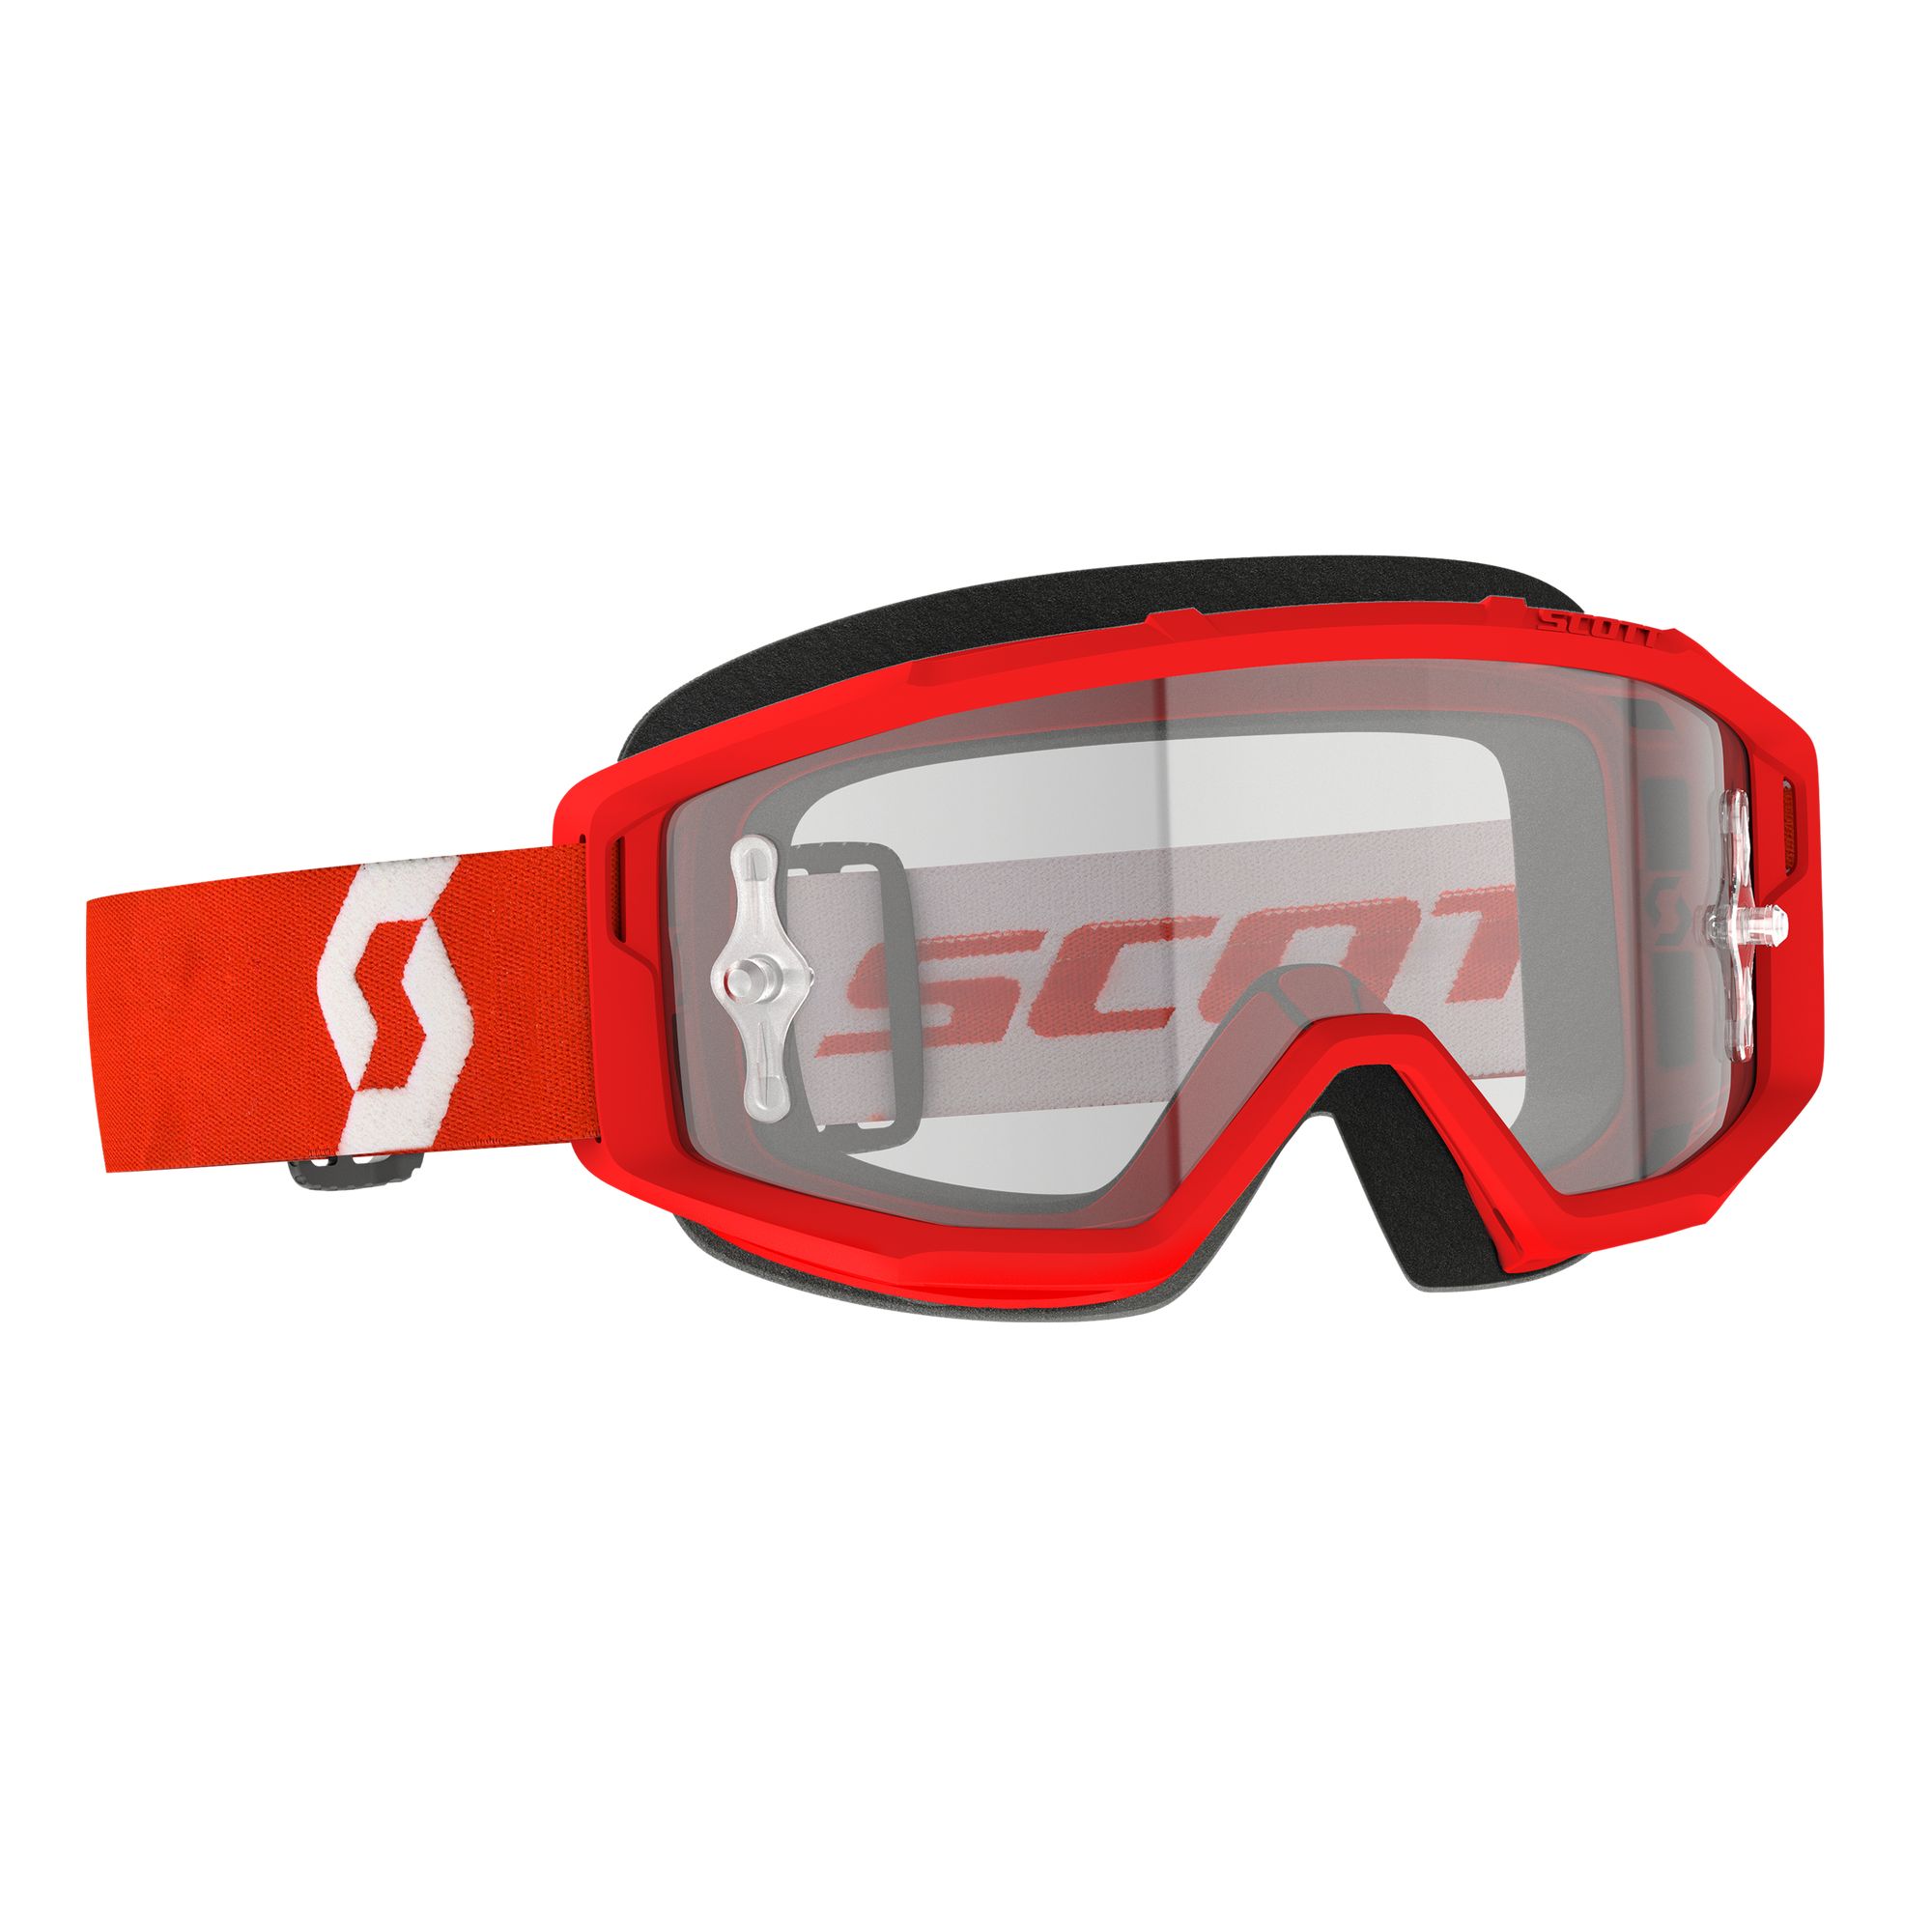 Brýle Scott PRIMAL CLEAR red/white clear